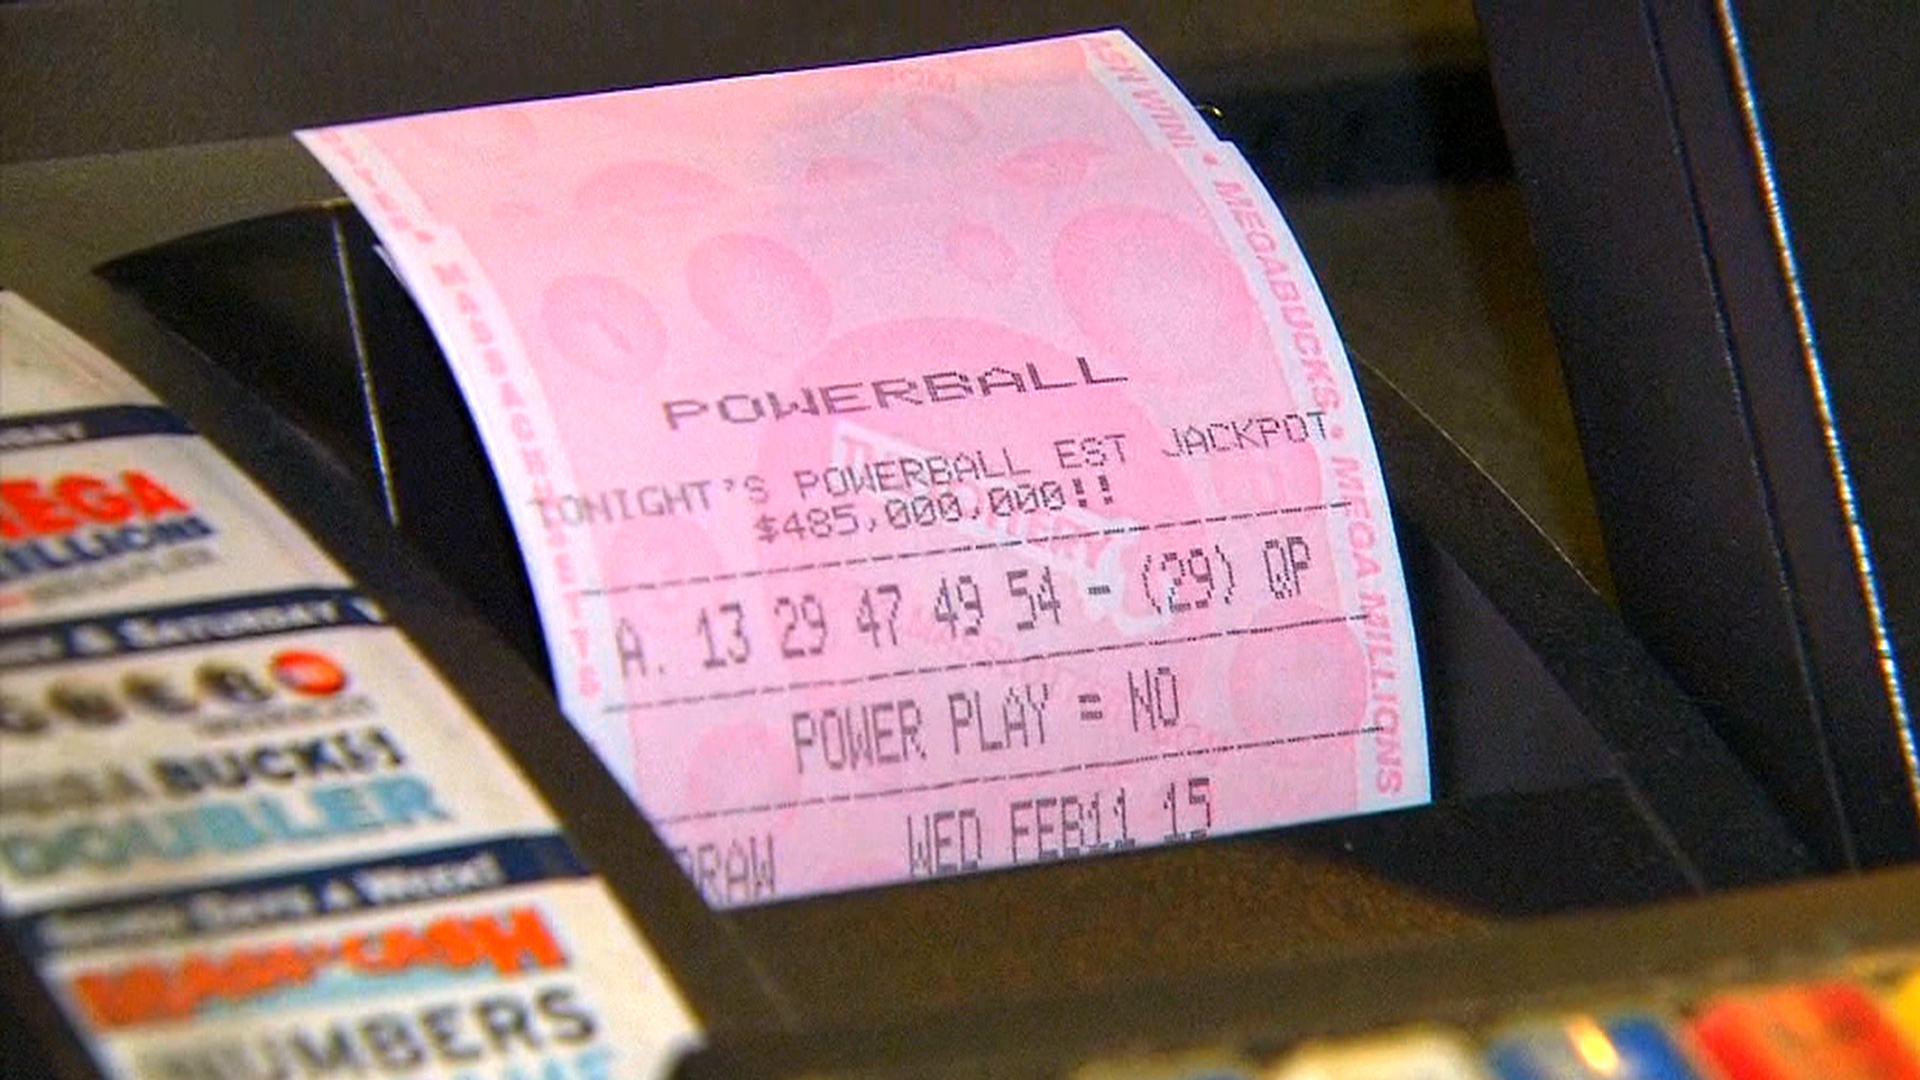 Powerball jackpot hits a whopping $800 million - TODAY.com1920 x 1080